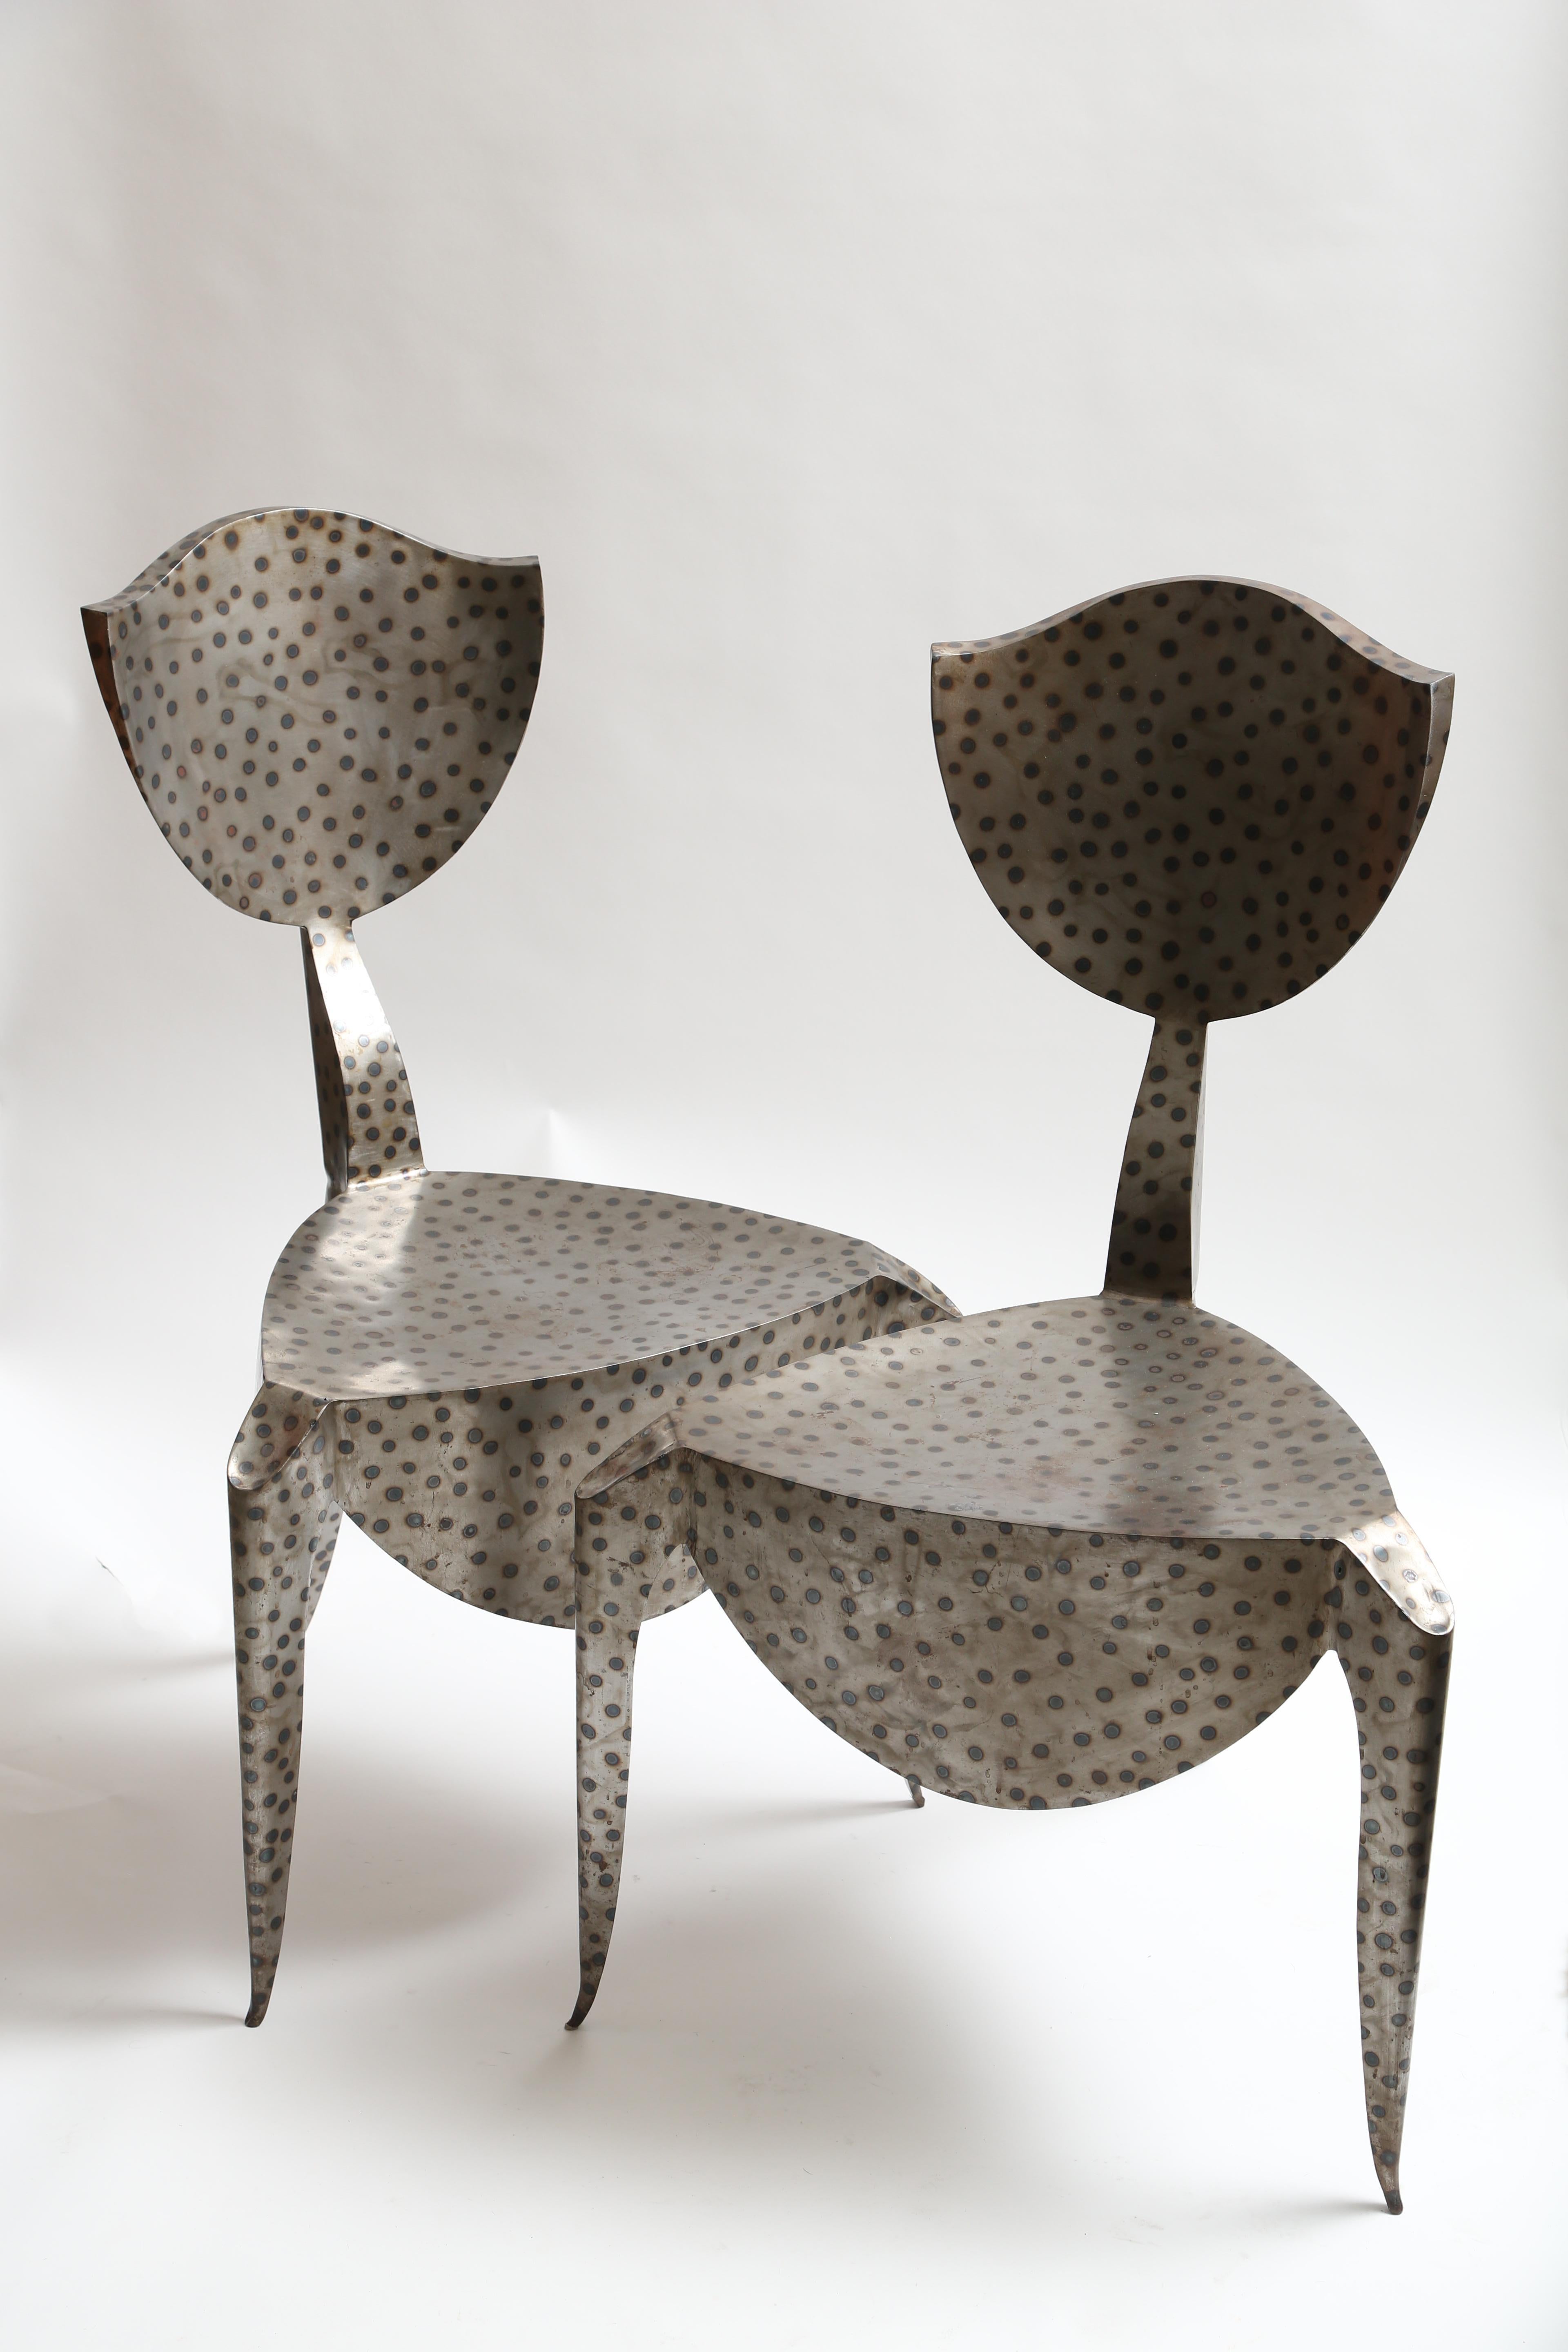 An iconic example from Andre Dubreuil
Price is for 1 chair